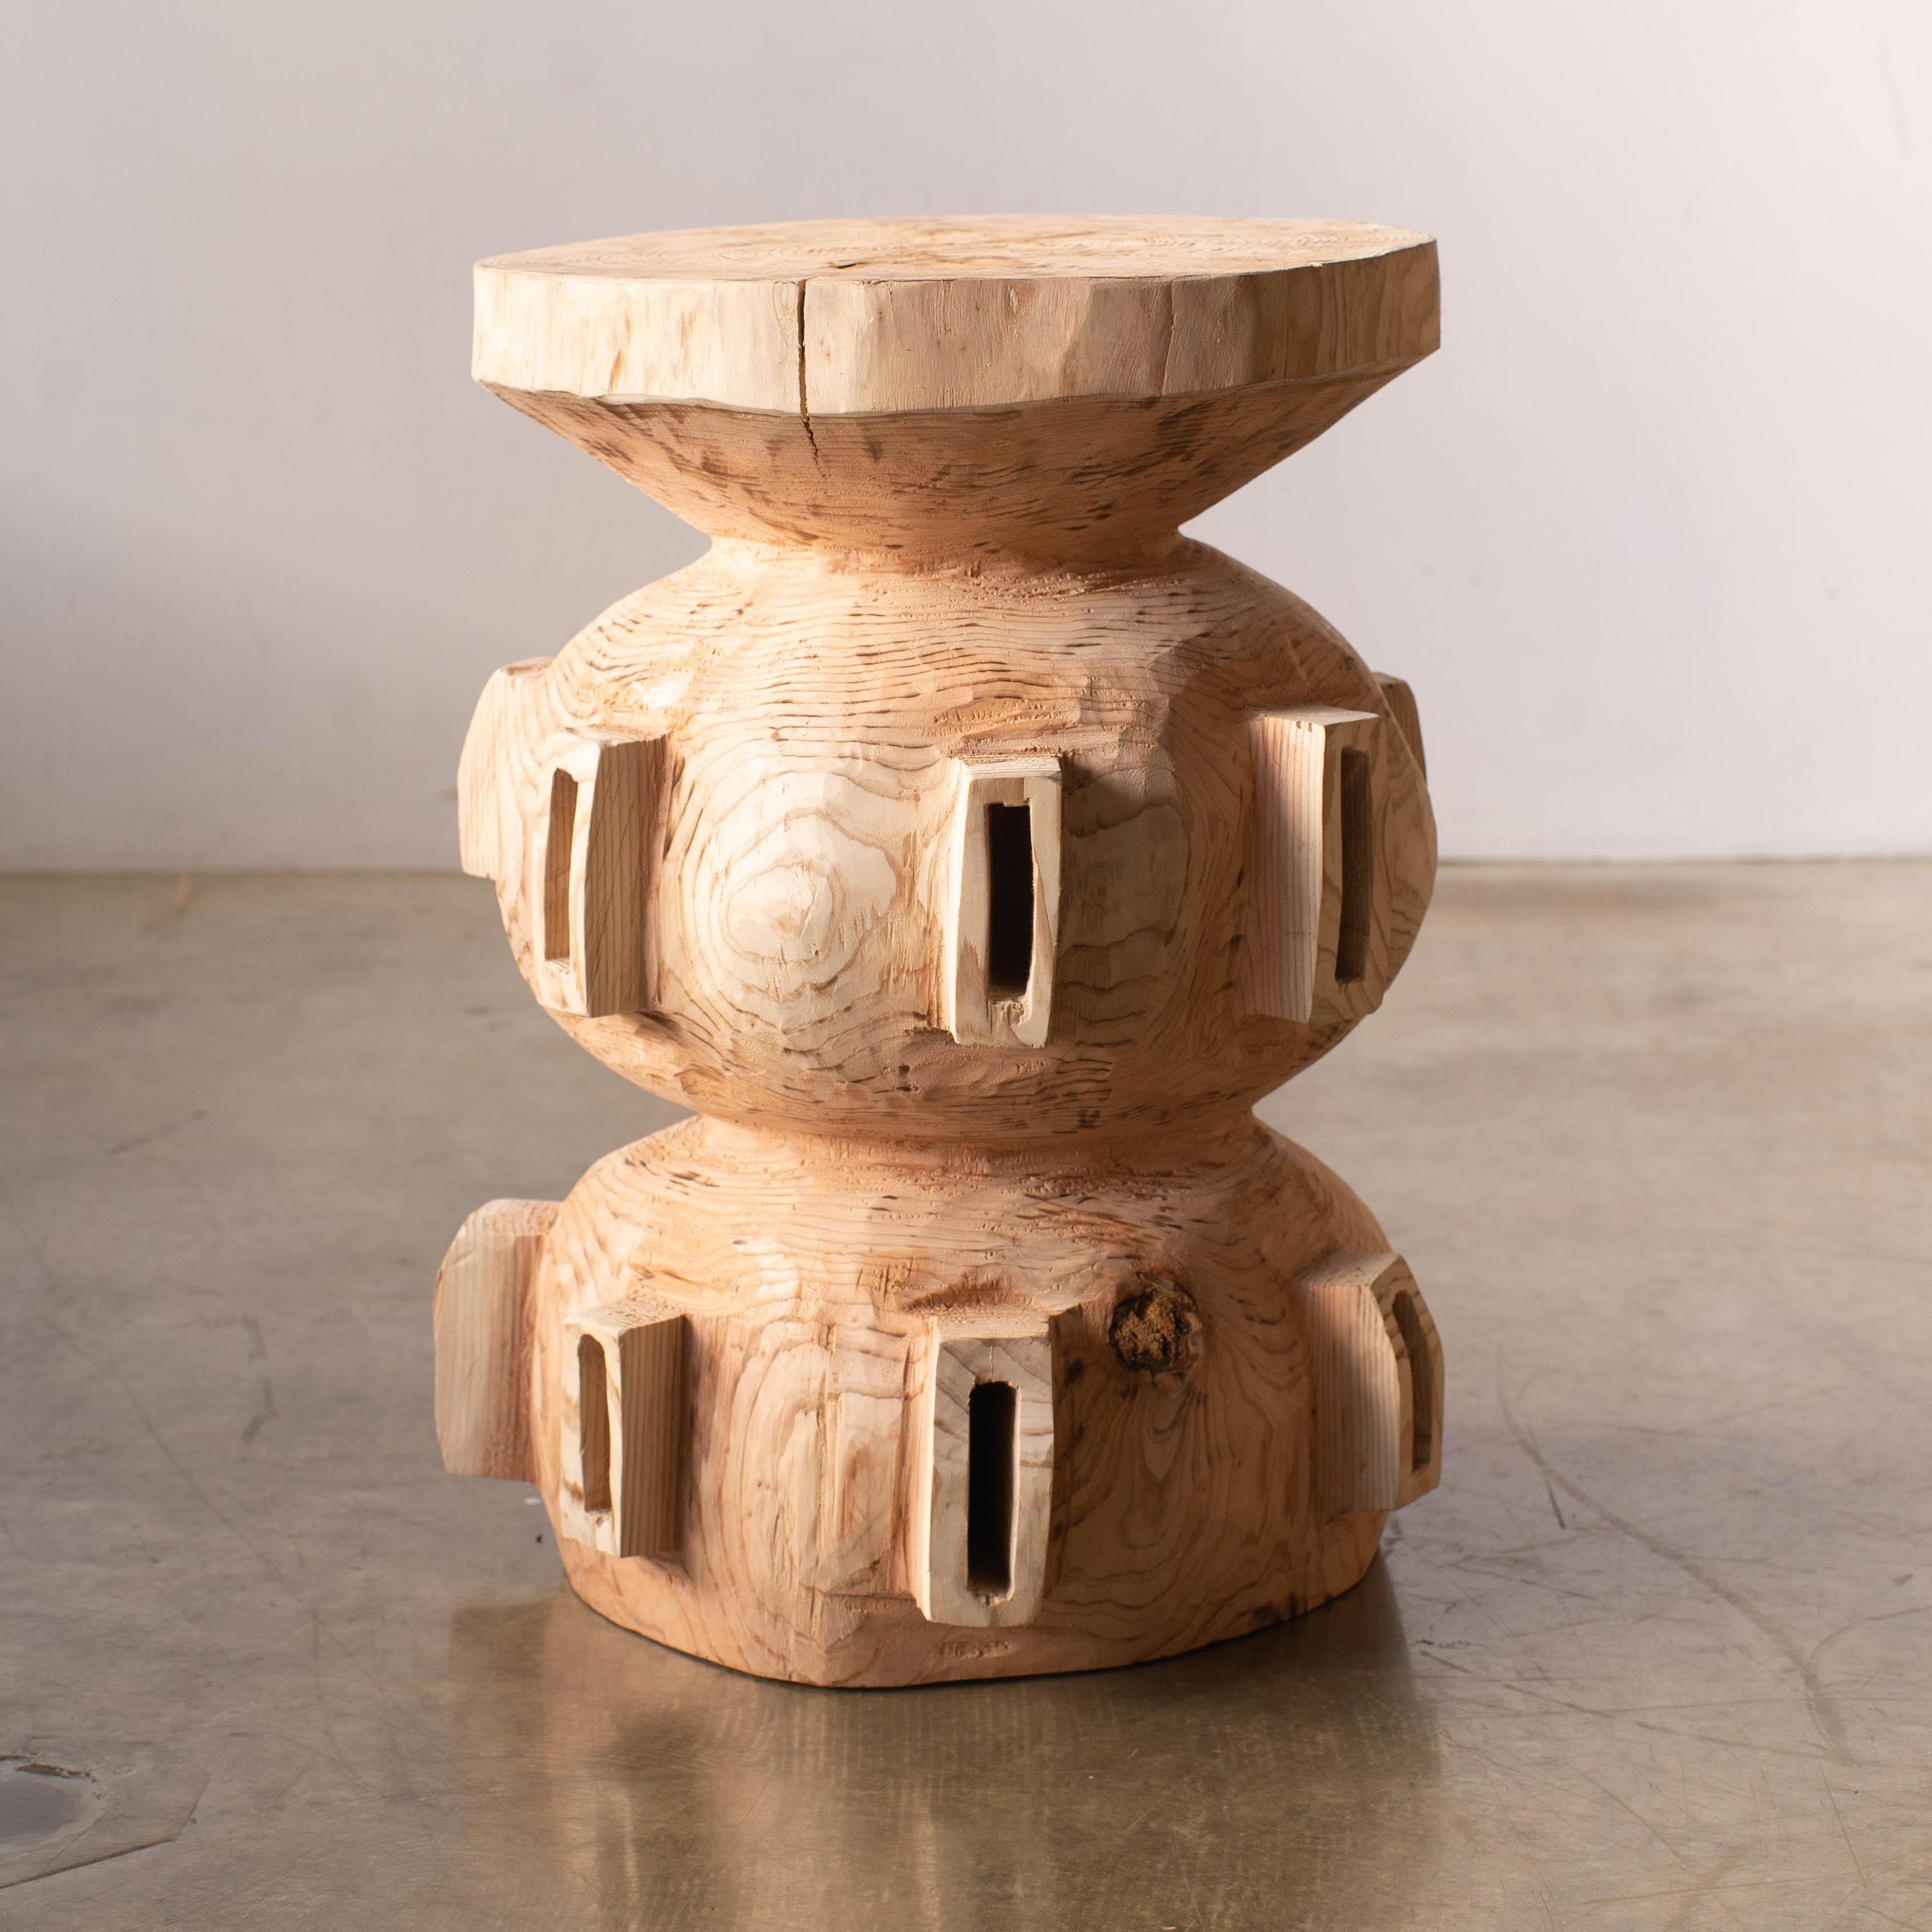 Hand-Carved Hiroyuki Nishimura and Sculptural Stool Side Table 15-2 Tribal Glamping For Sale